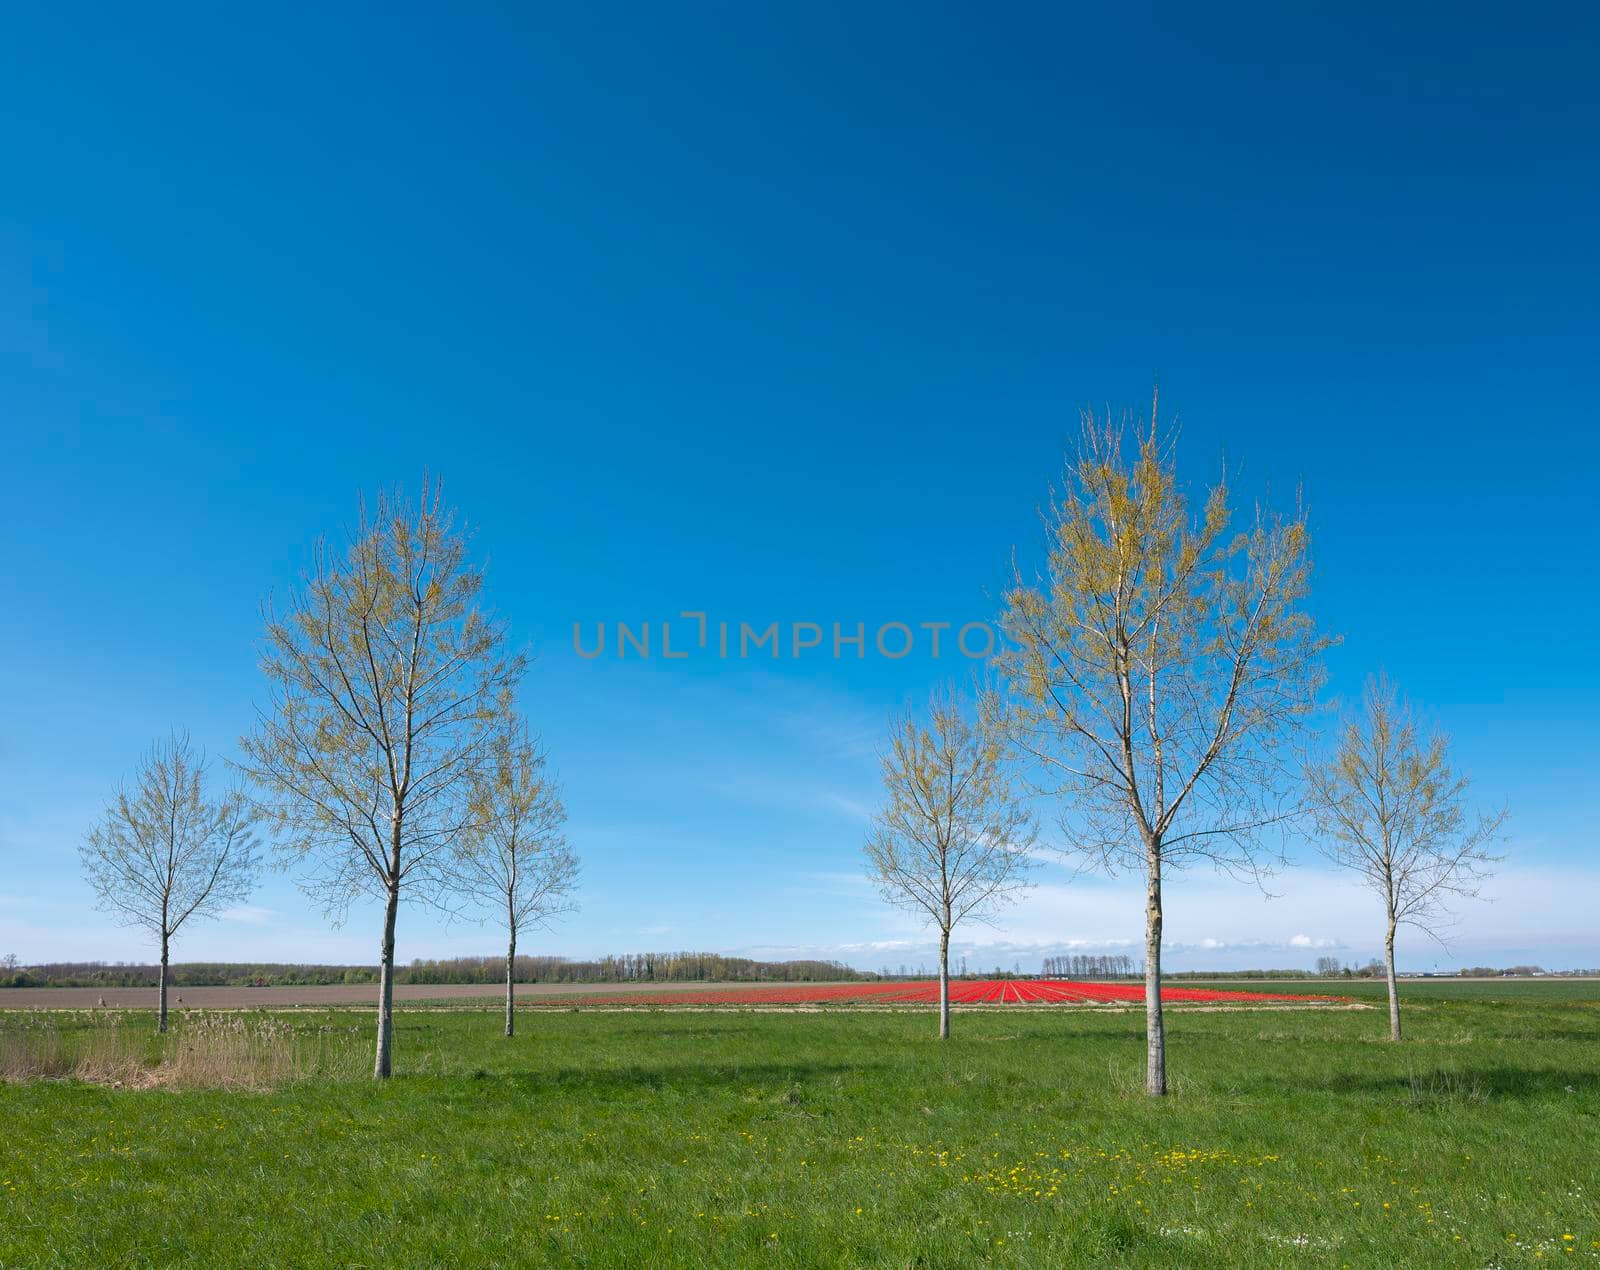 open spring landscape with tulip field and trees under blue sky in dutch province of flevoland in the netherlands